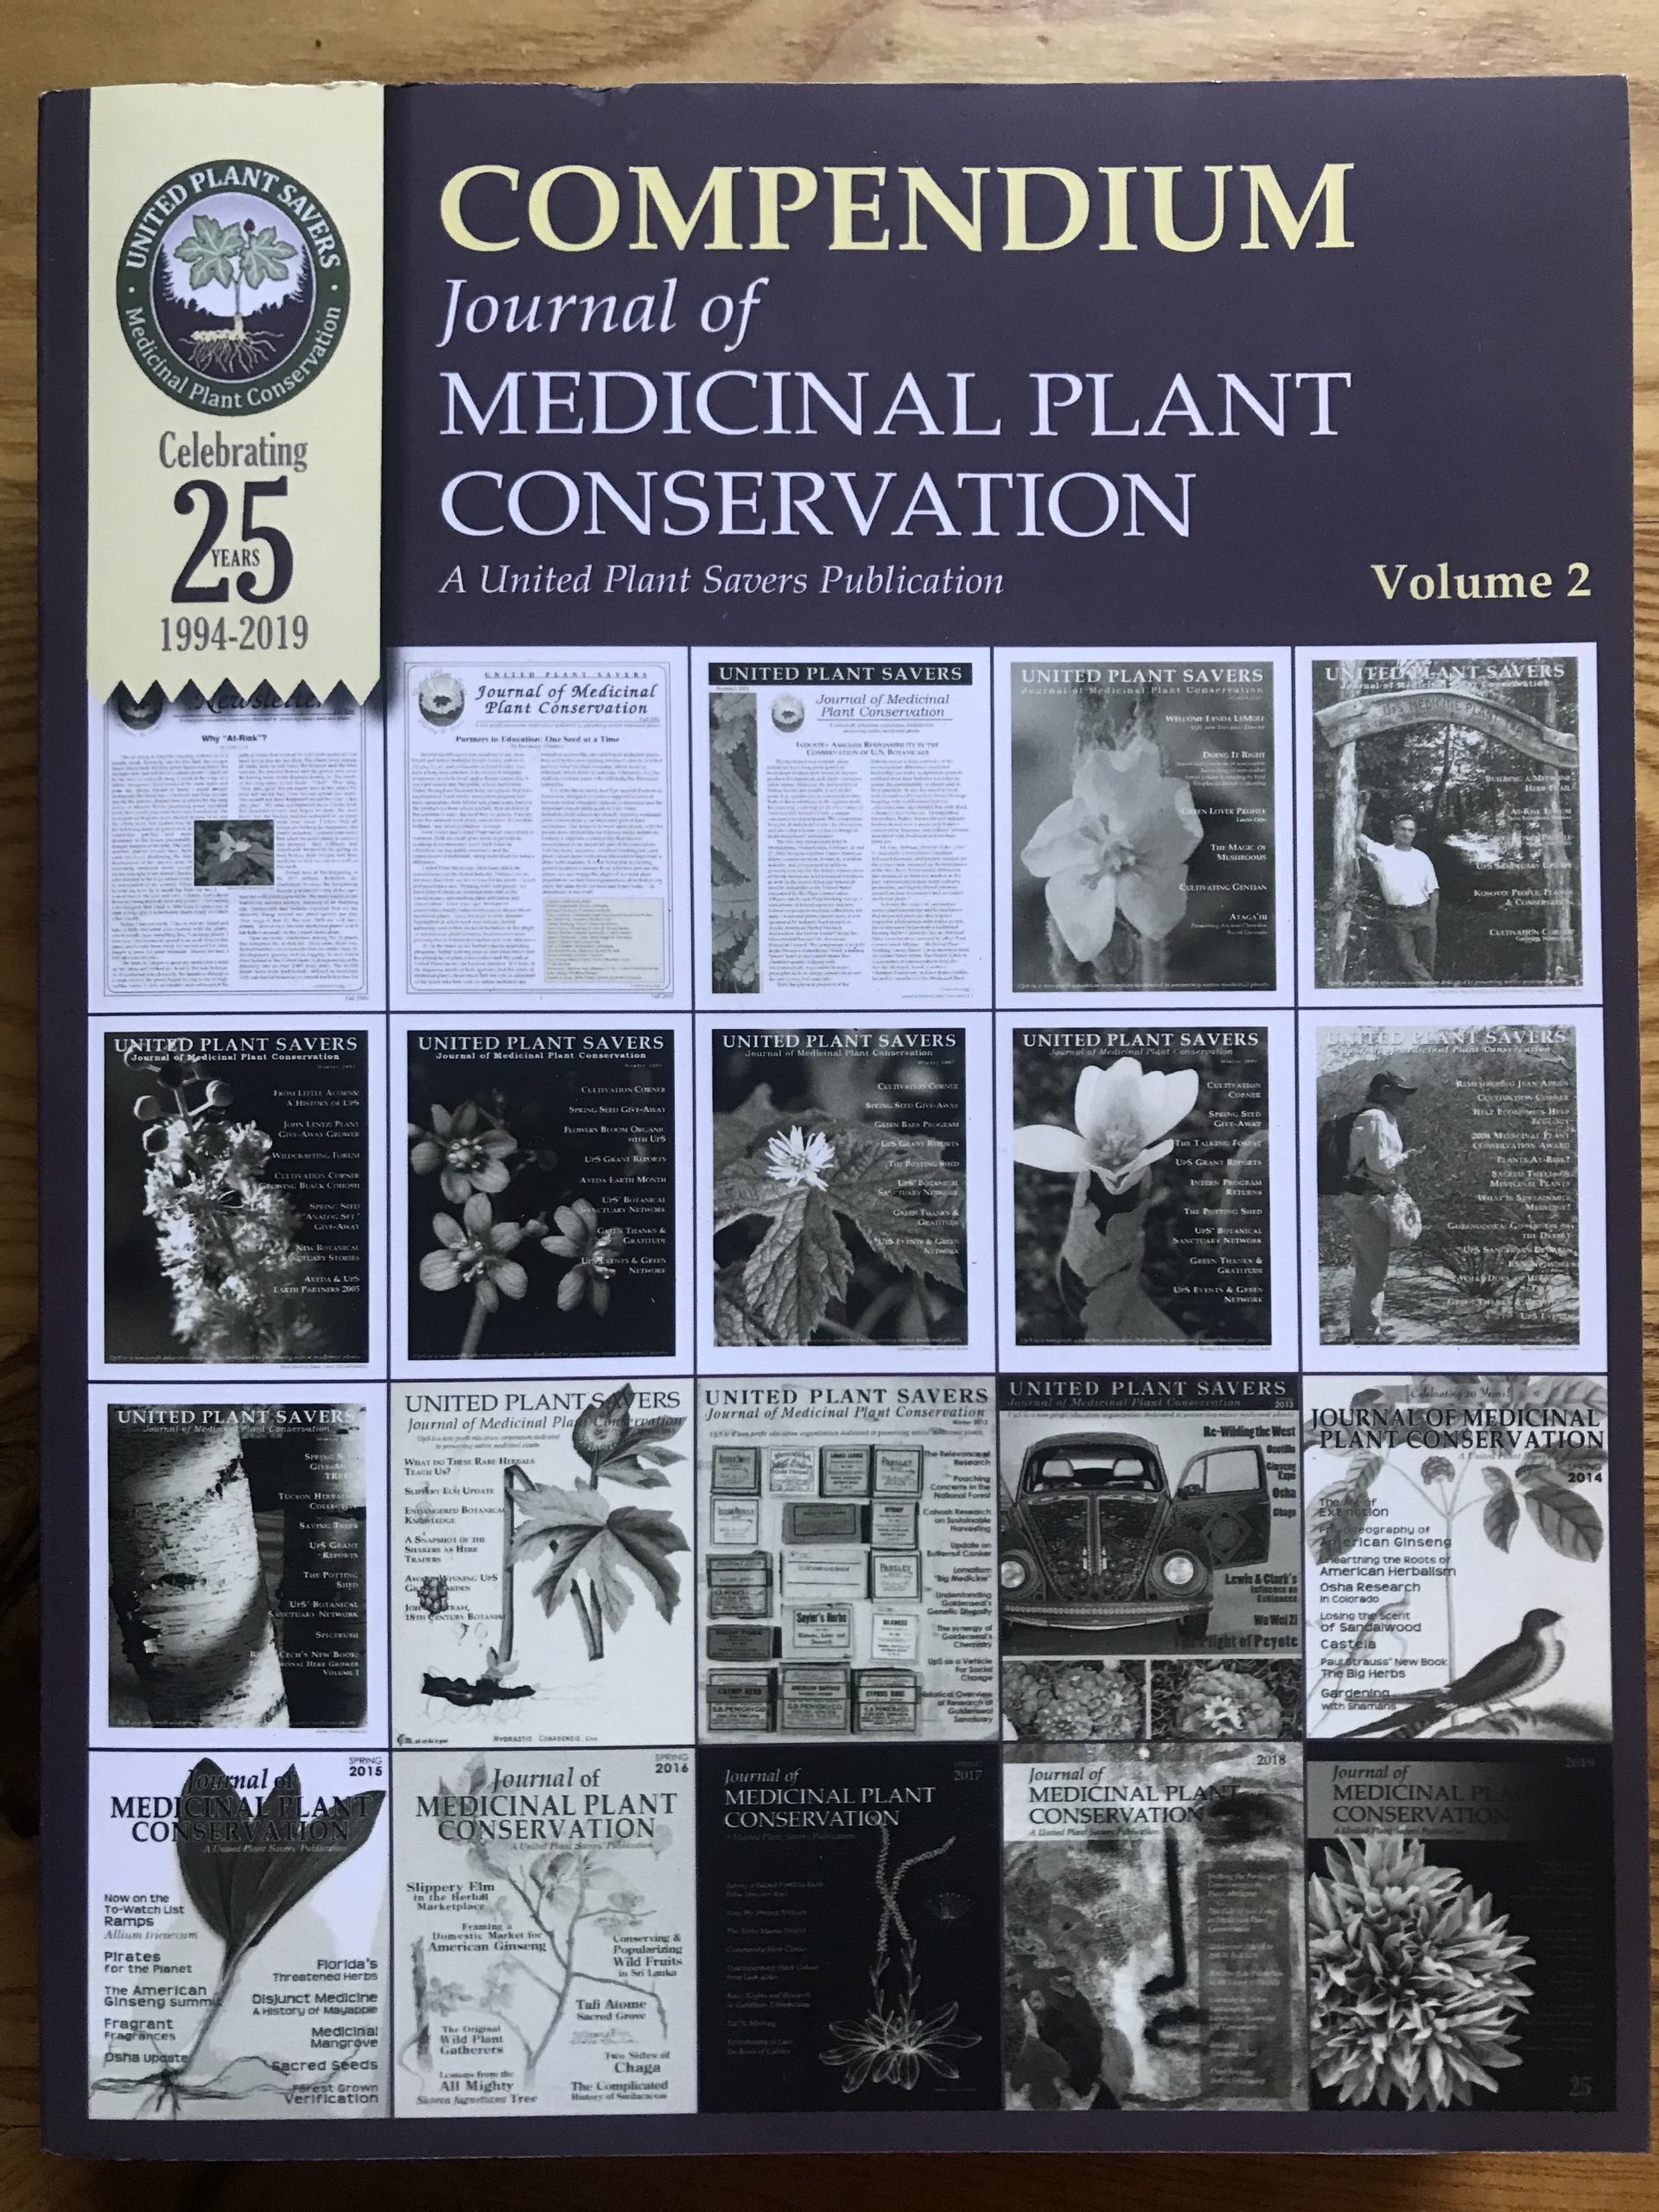 research journal of medicinal plants